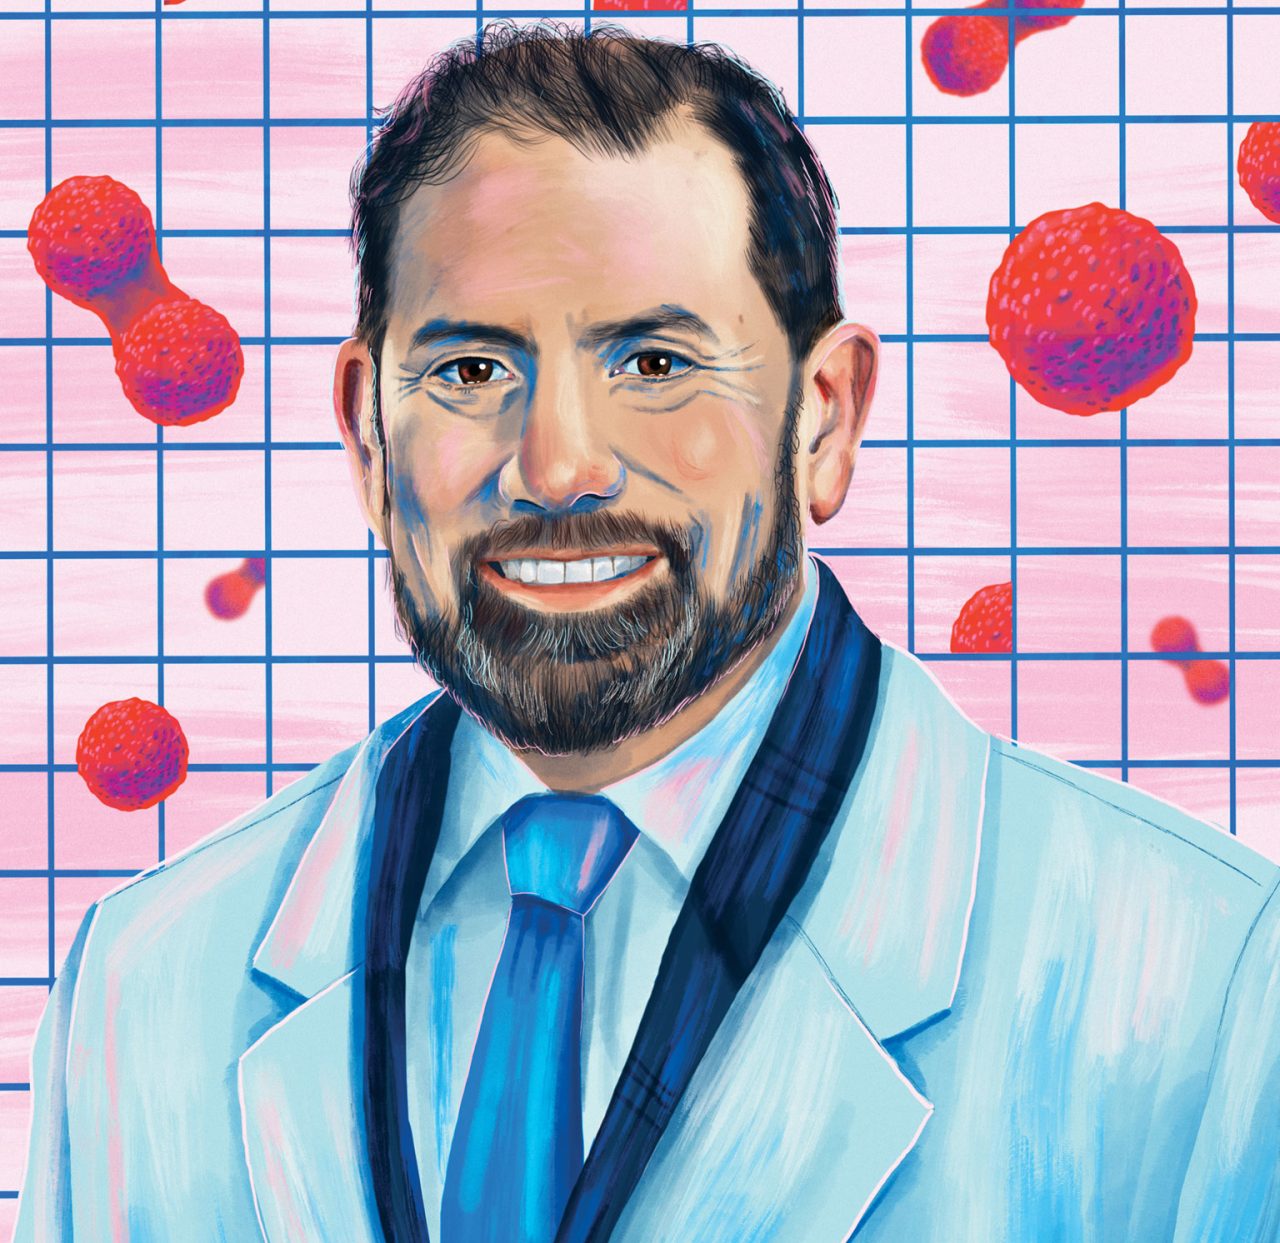 Luis Diaz has been named to Fast Company’s Most Creative People in Business for 2023 list – Memorial Sloan Kettering Cancer Center